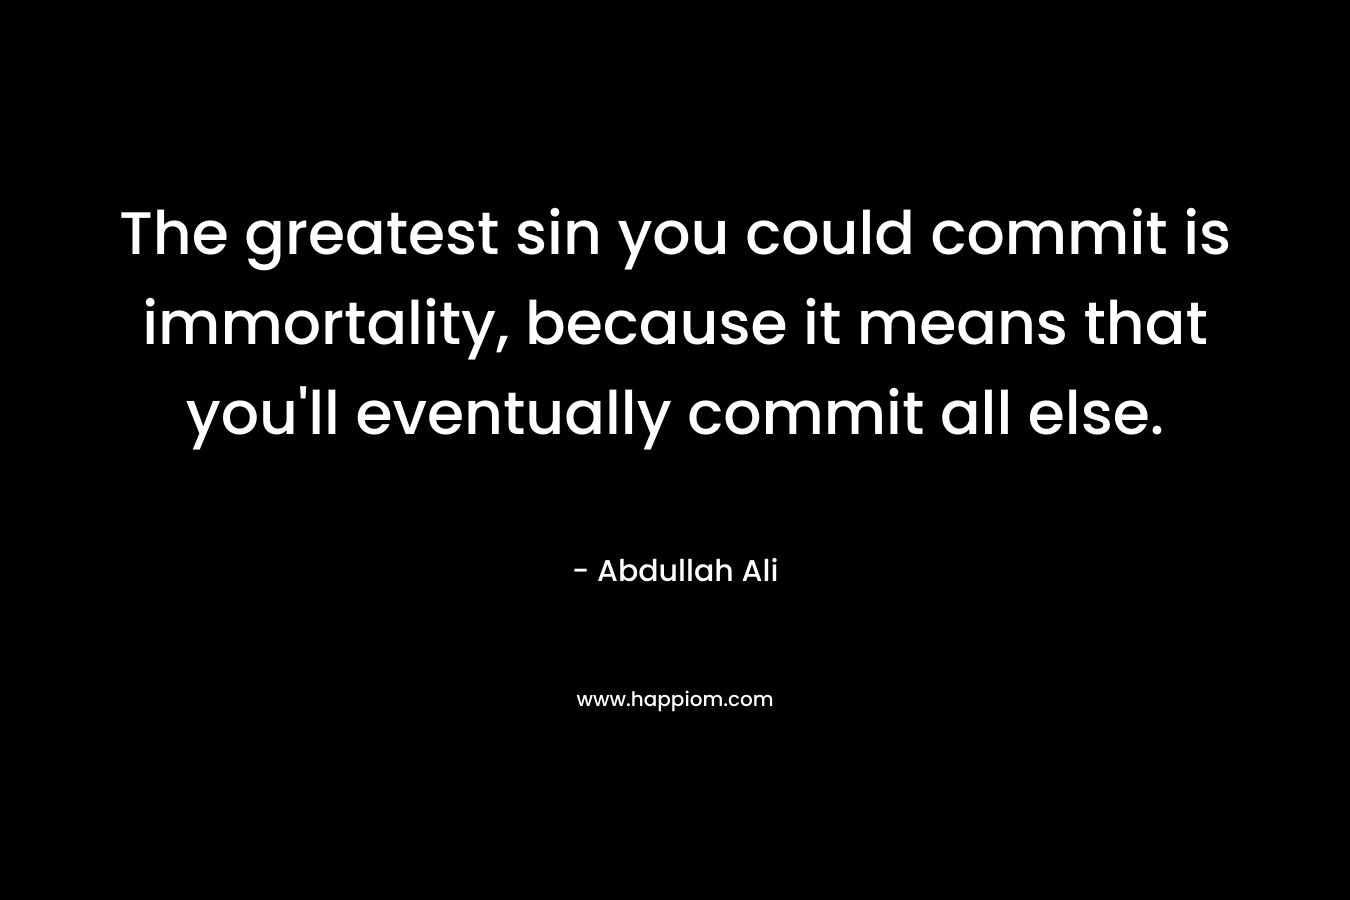 The greatest sin you could commit is immortality, because it means that you'll eventually commit all else.